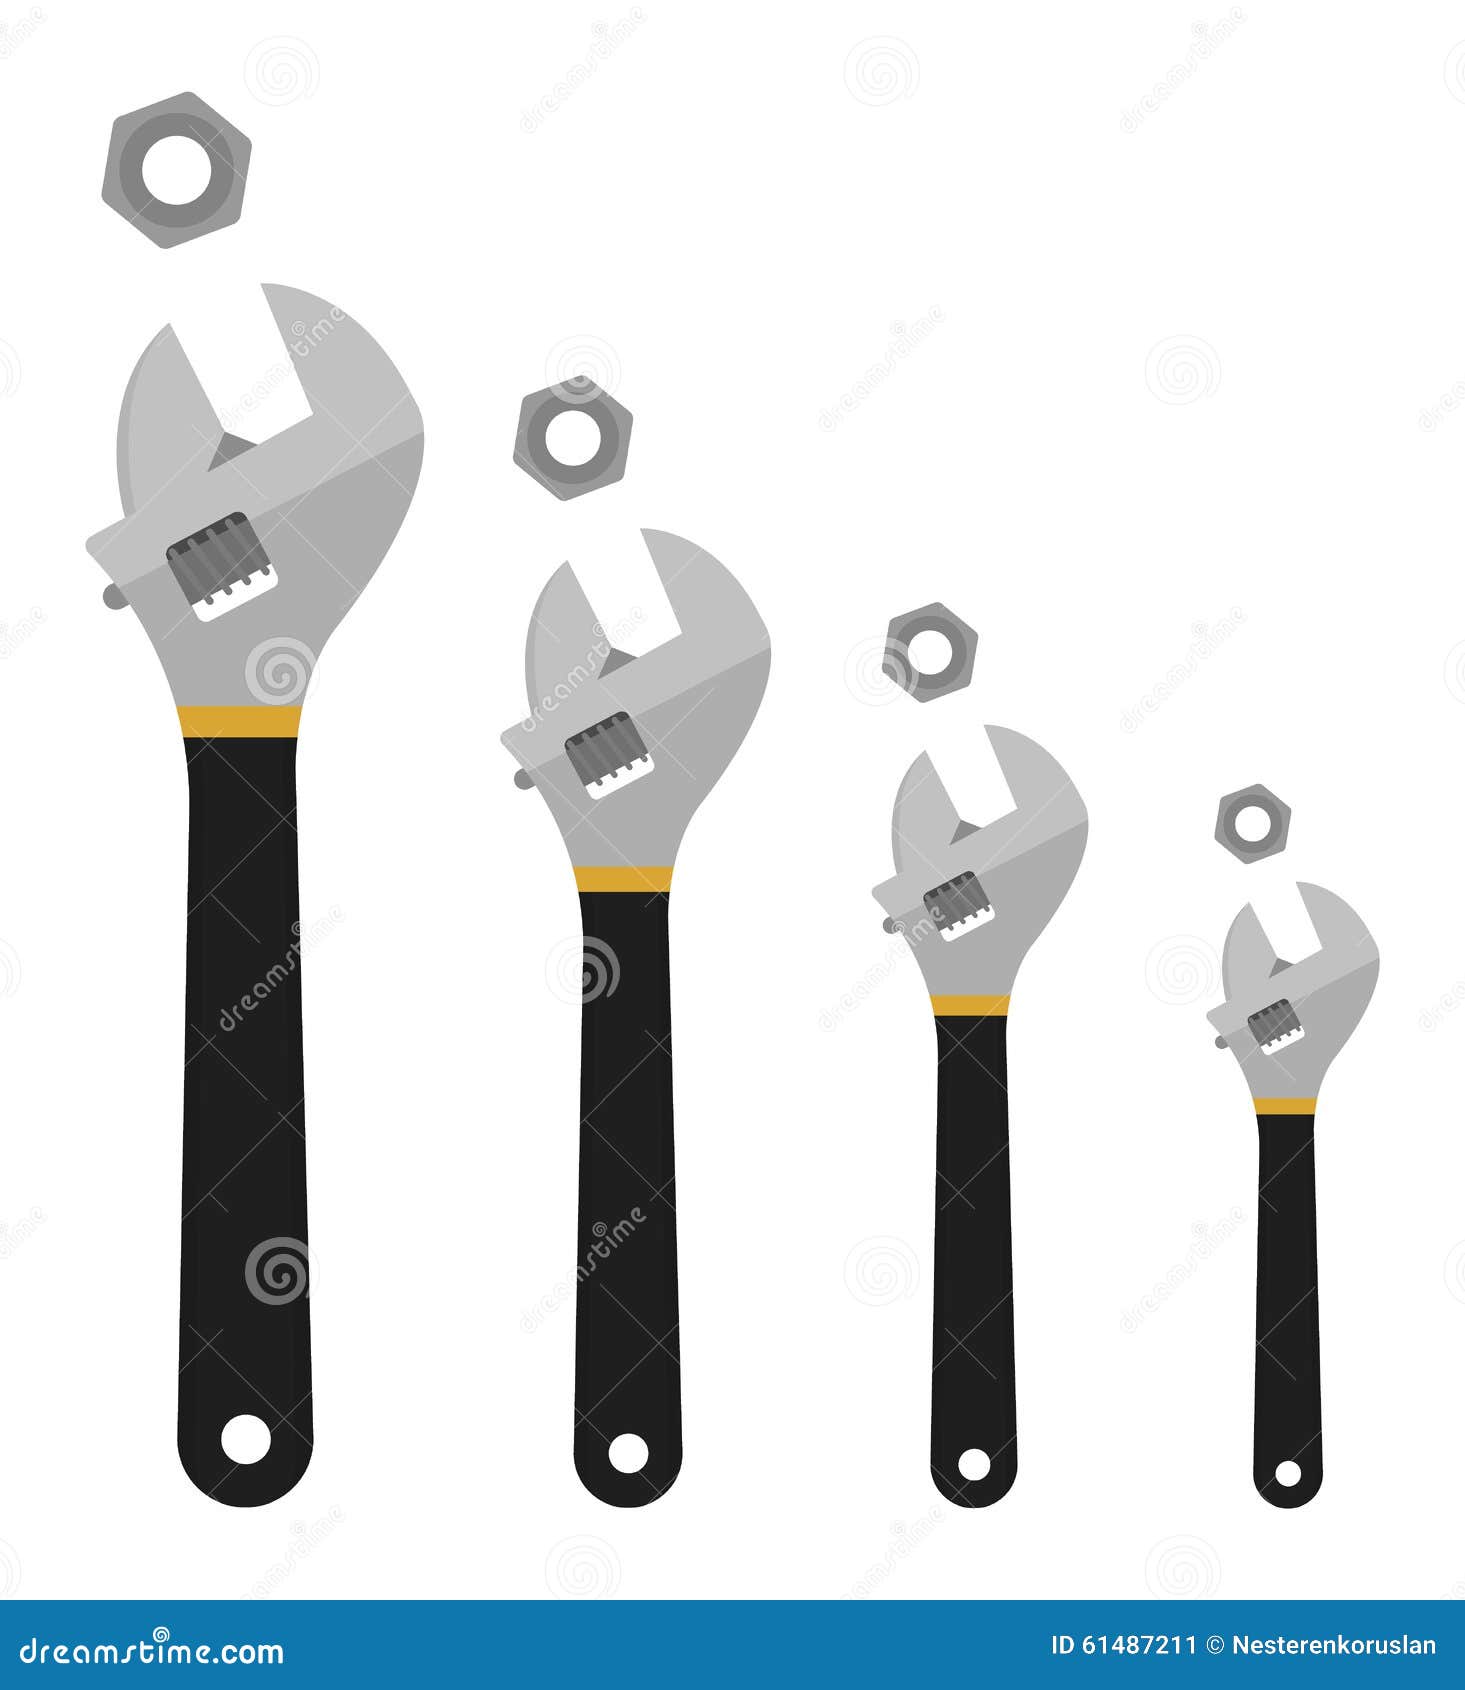 Wrenches Clip Art Stock Illustrations – 61 Wrenches Clip Art Stock  Illustrations, Vectors & Clipart - Dreamstime